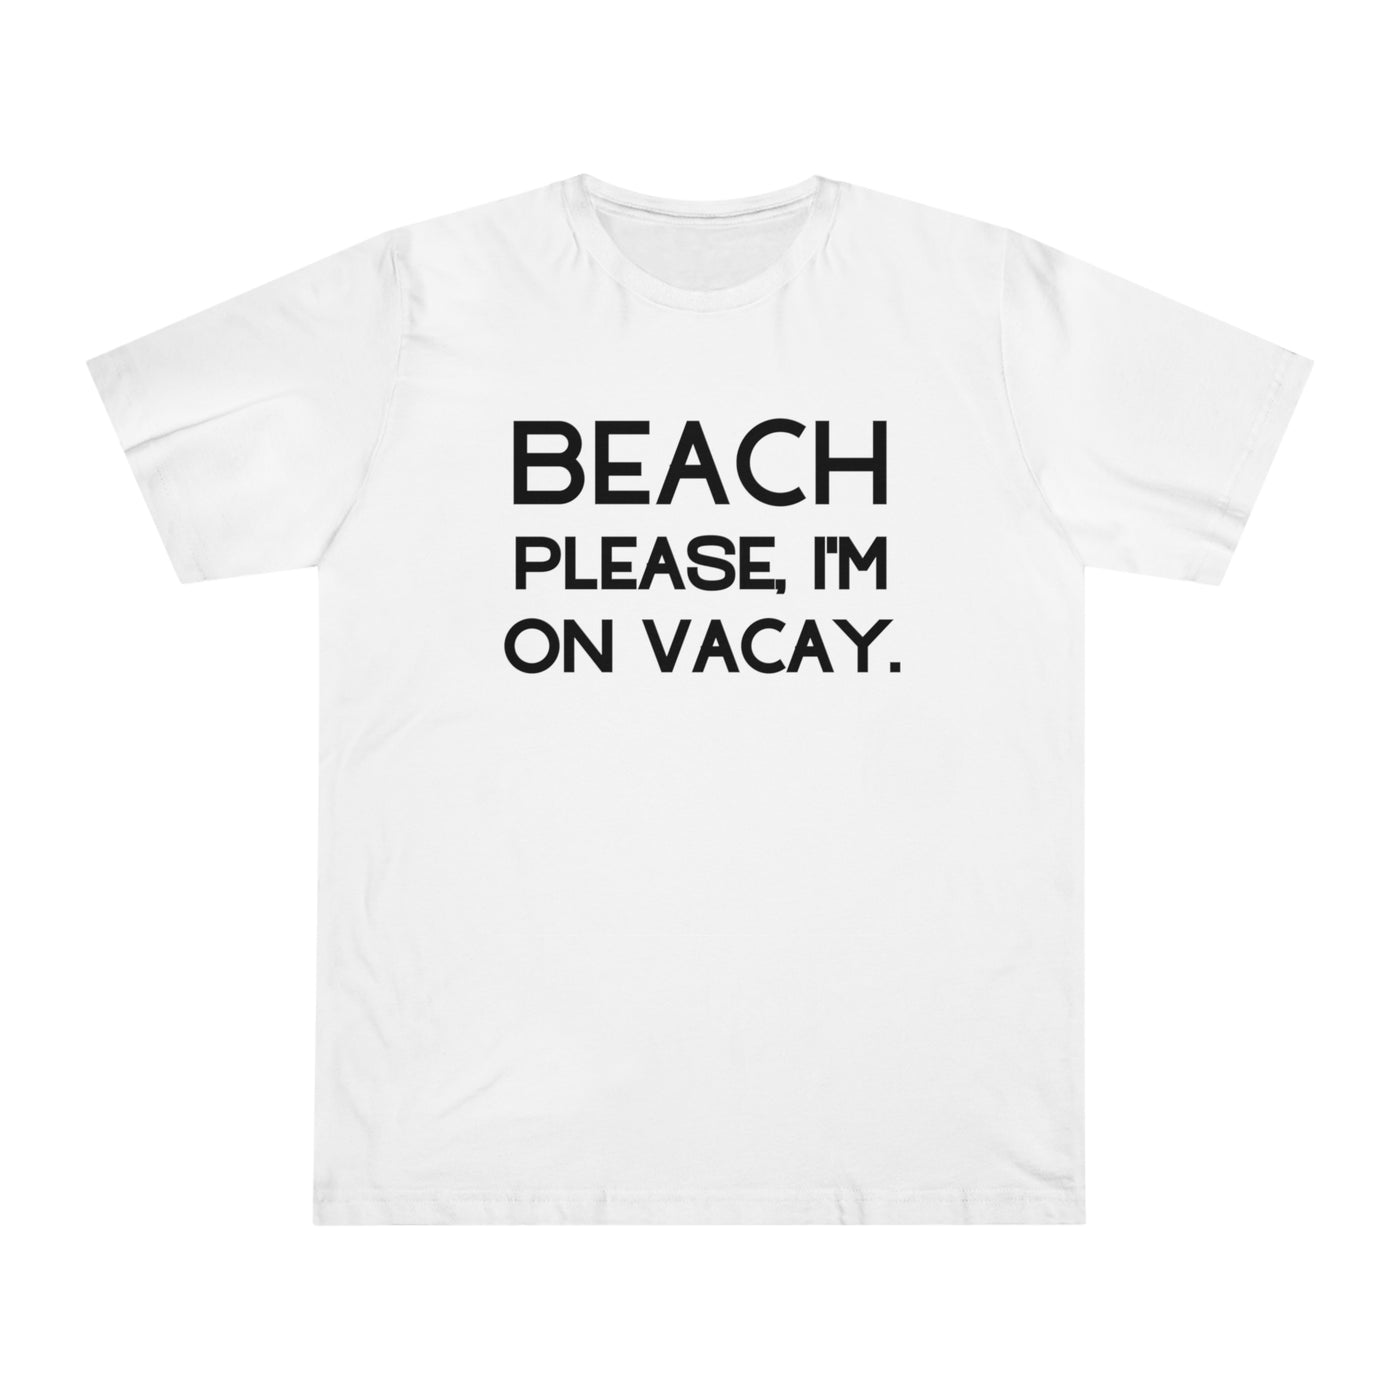 BEACH PLEASE, I'M ON VACAY Unisex Deluxe T-shirt